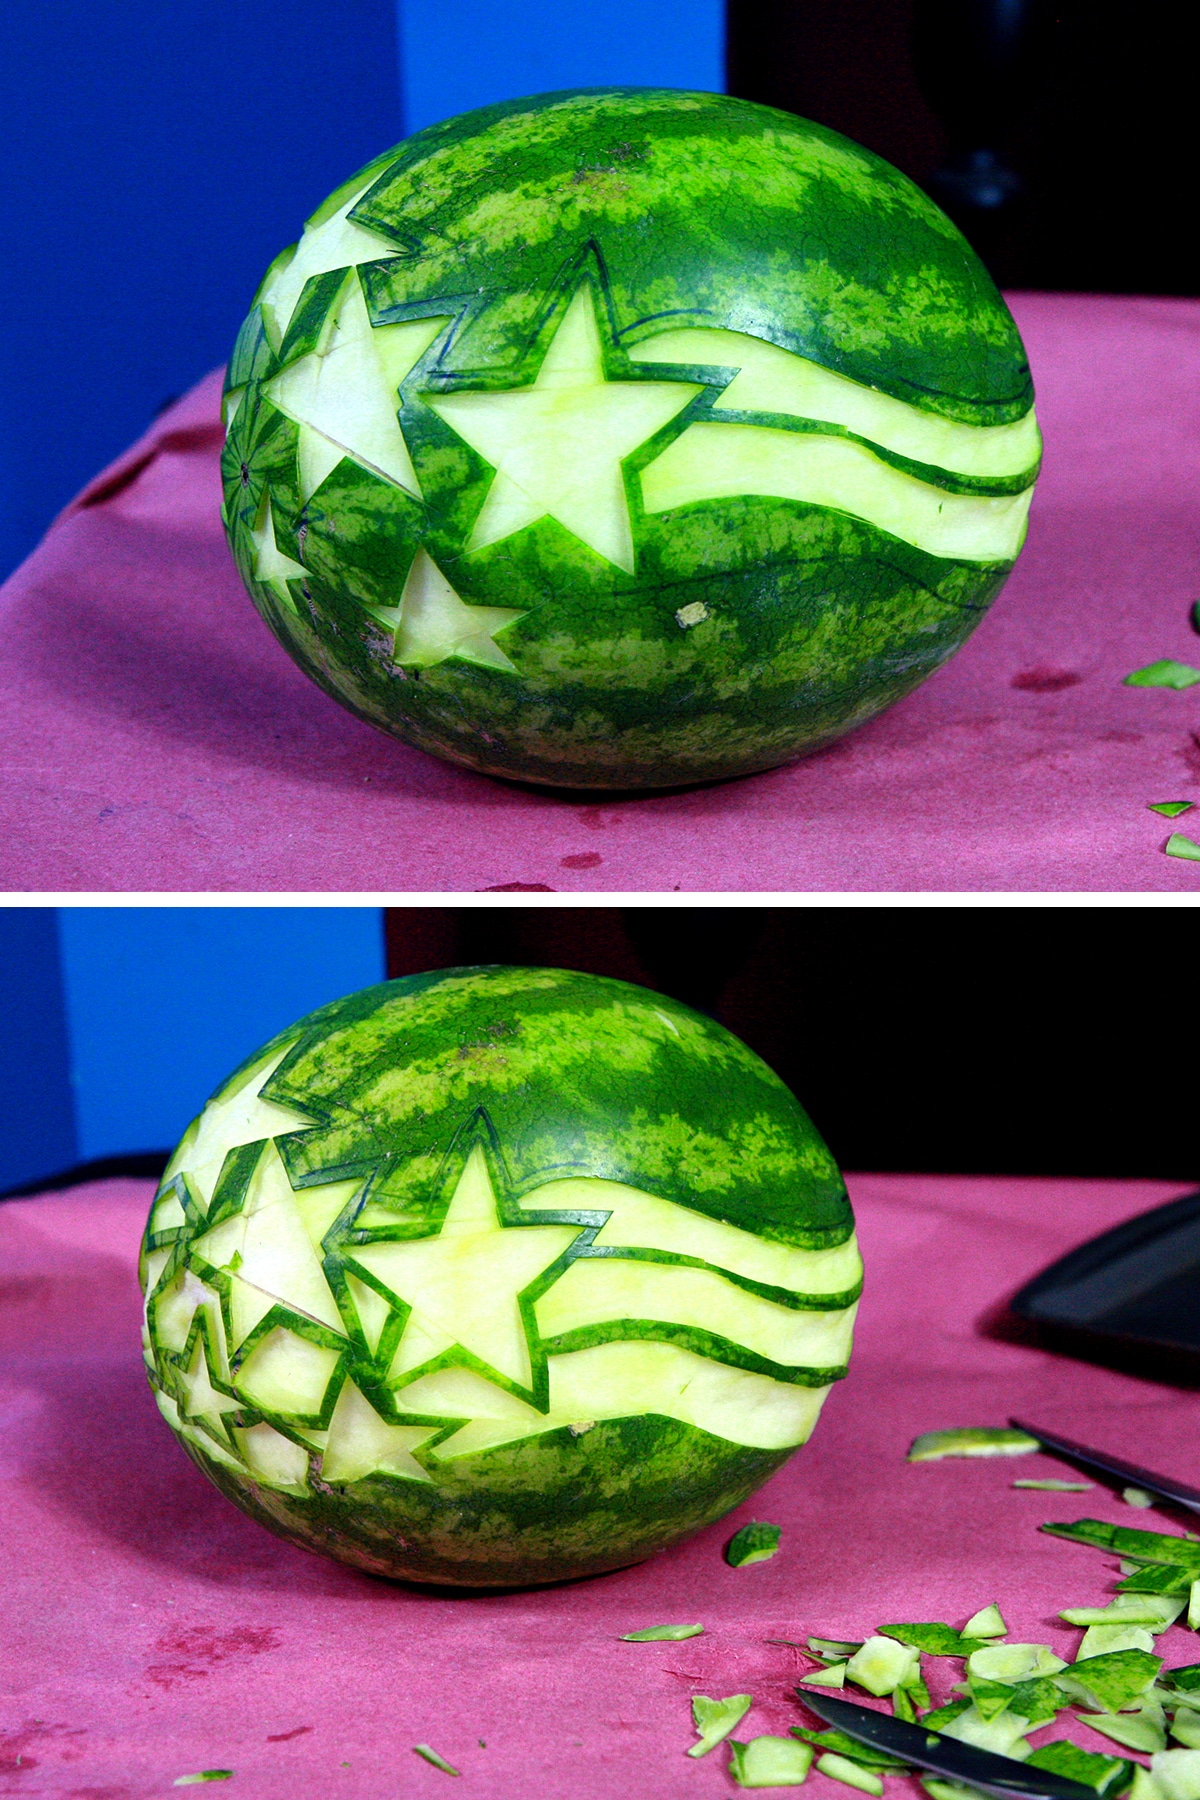 A two part image showing stars and stripes being carved out of the watermelon rind.